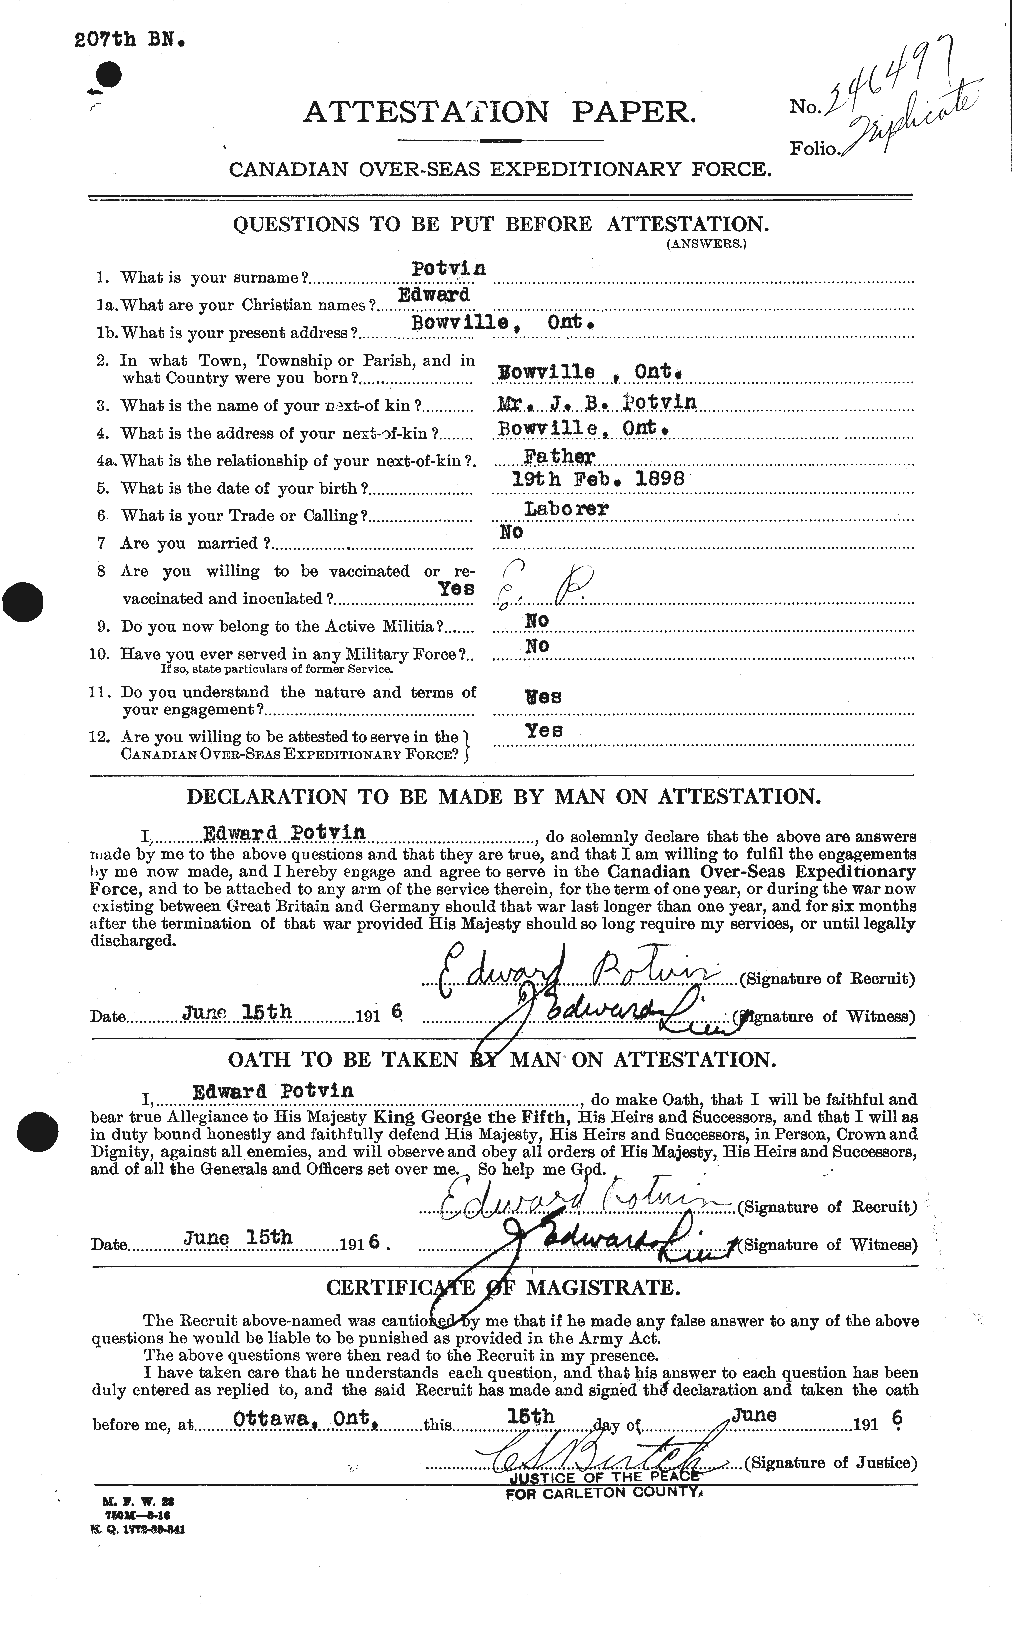 Personnel Records of the First World War - CEF 584621a